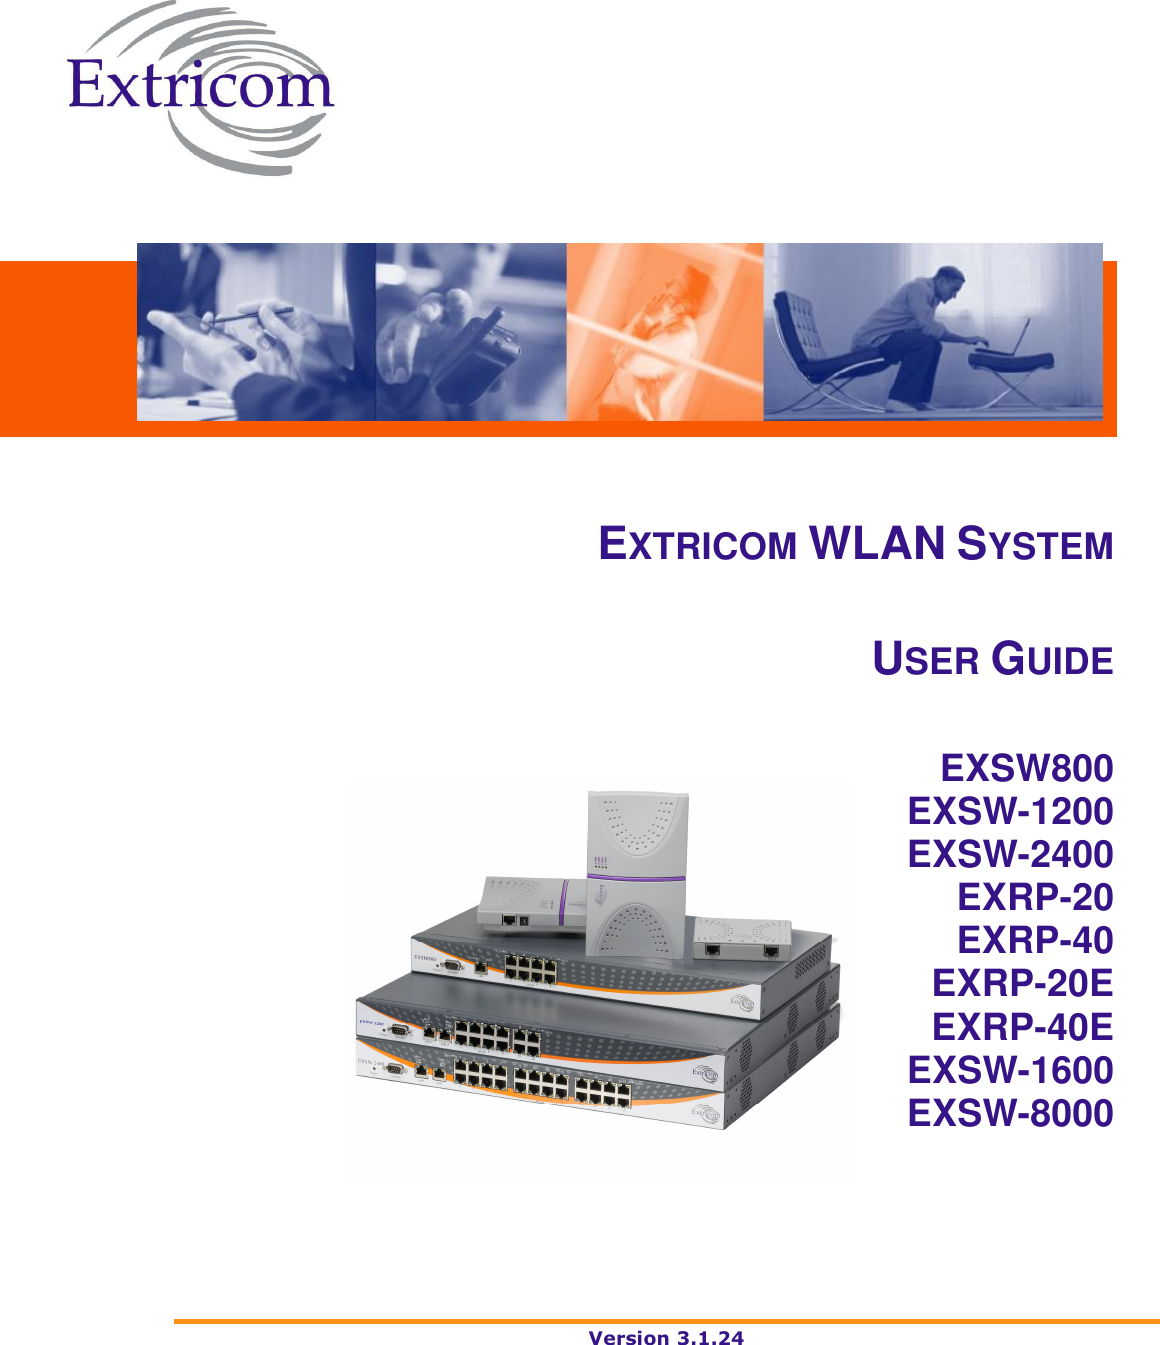 Version 3.1.24    EXTRICOM WLAN SYSTEM USER GUIDE EXSW800 EXSW-1200 EXSW-2400 EXRP-20 EXRP-40 EXRP-20E EXRP-40E EXSW-1600 EXSW-8000     